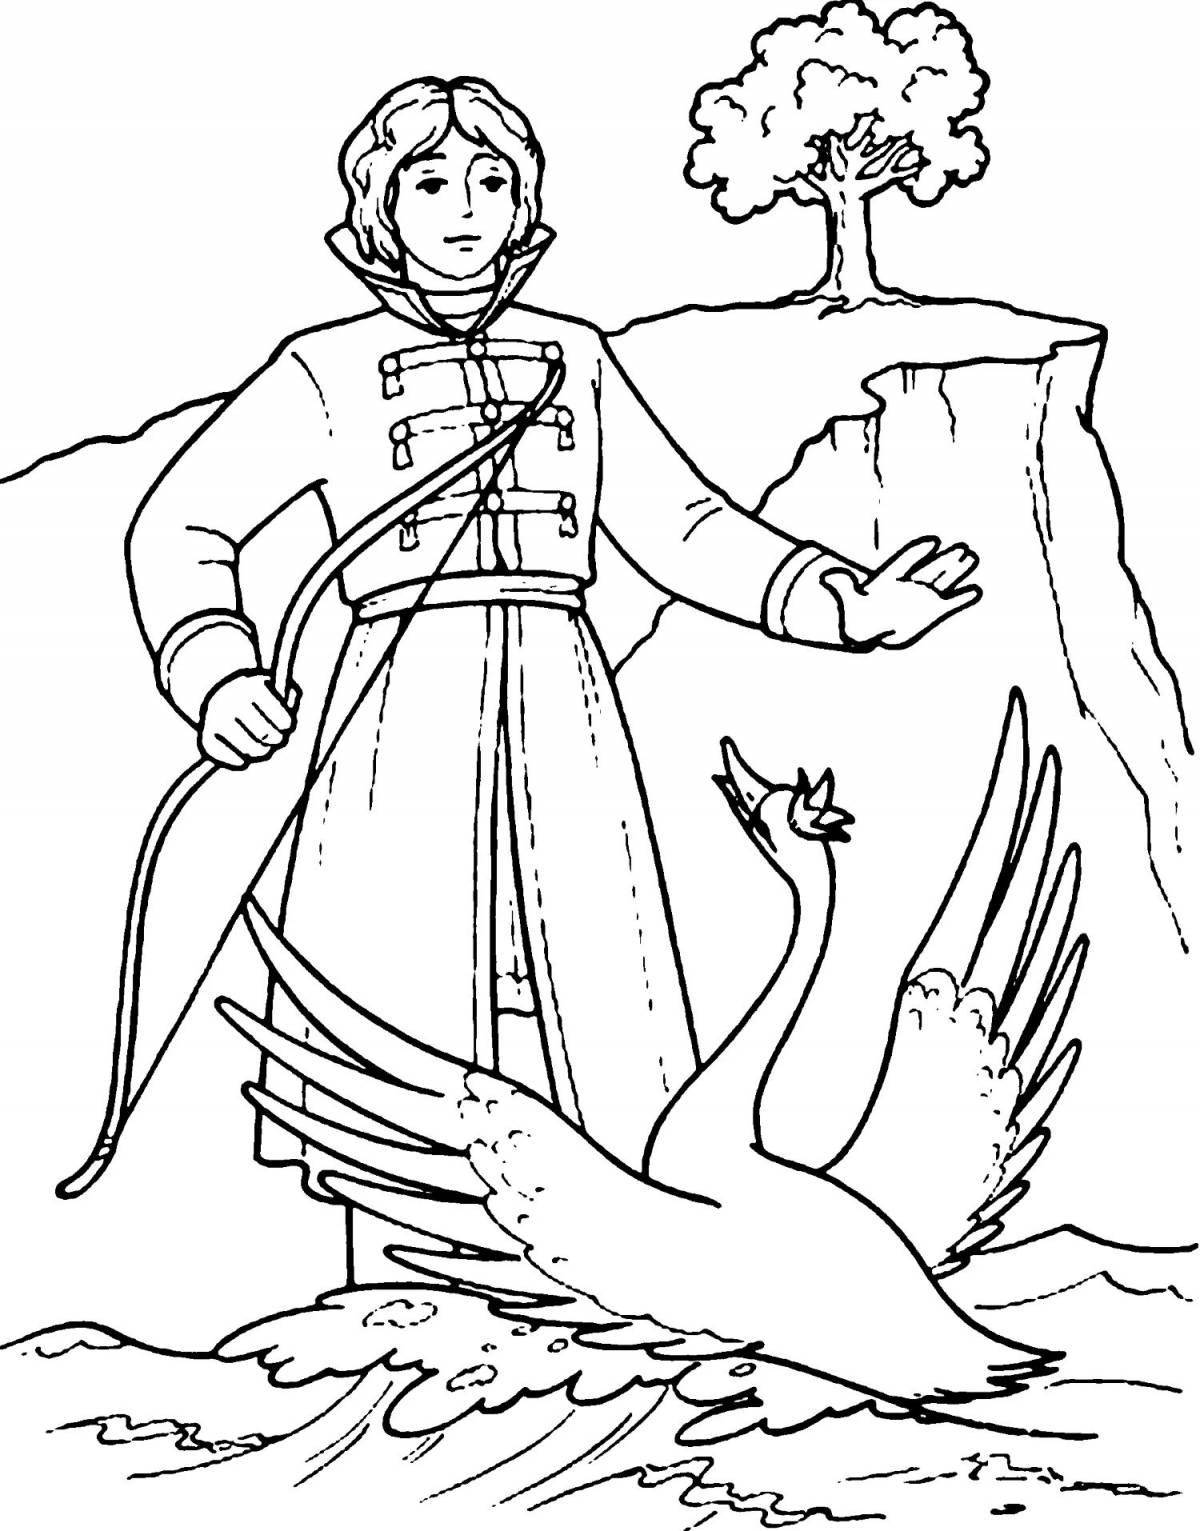 Crazy coloring book based on Pushkin's fairy tales for preschoolers